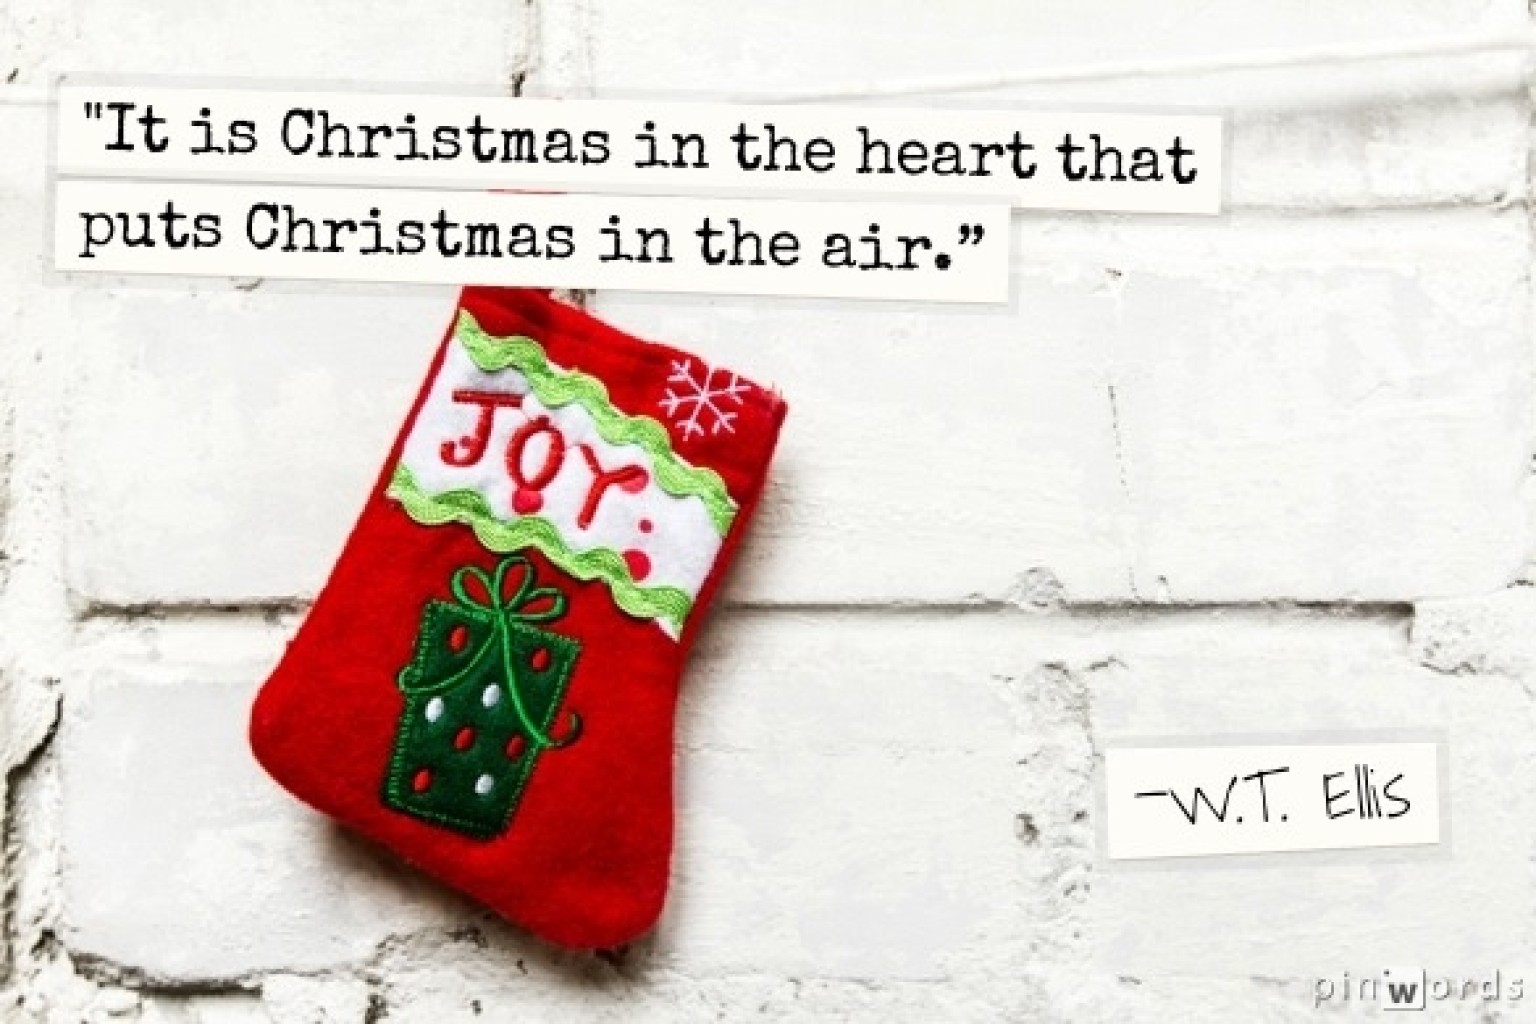 Christmas Quotes: 12 Spirited Sayings To Celebrate The Season